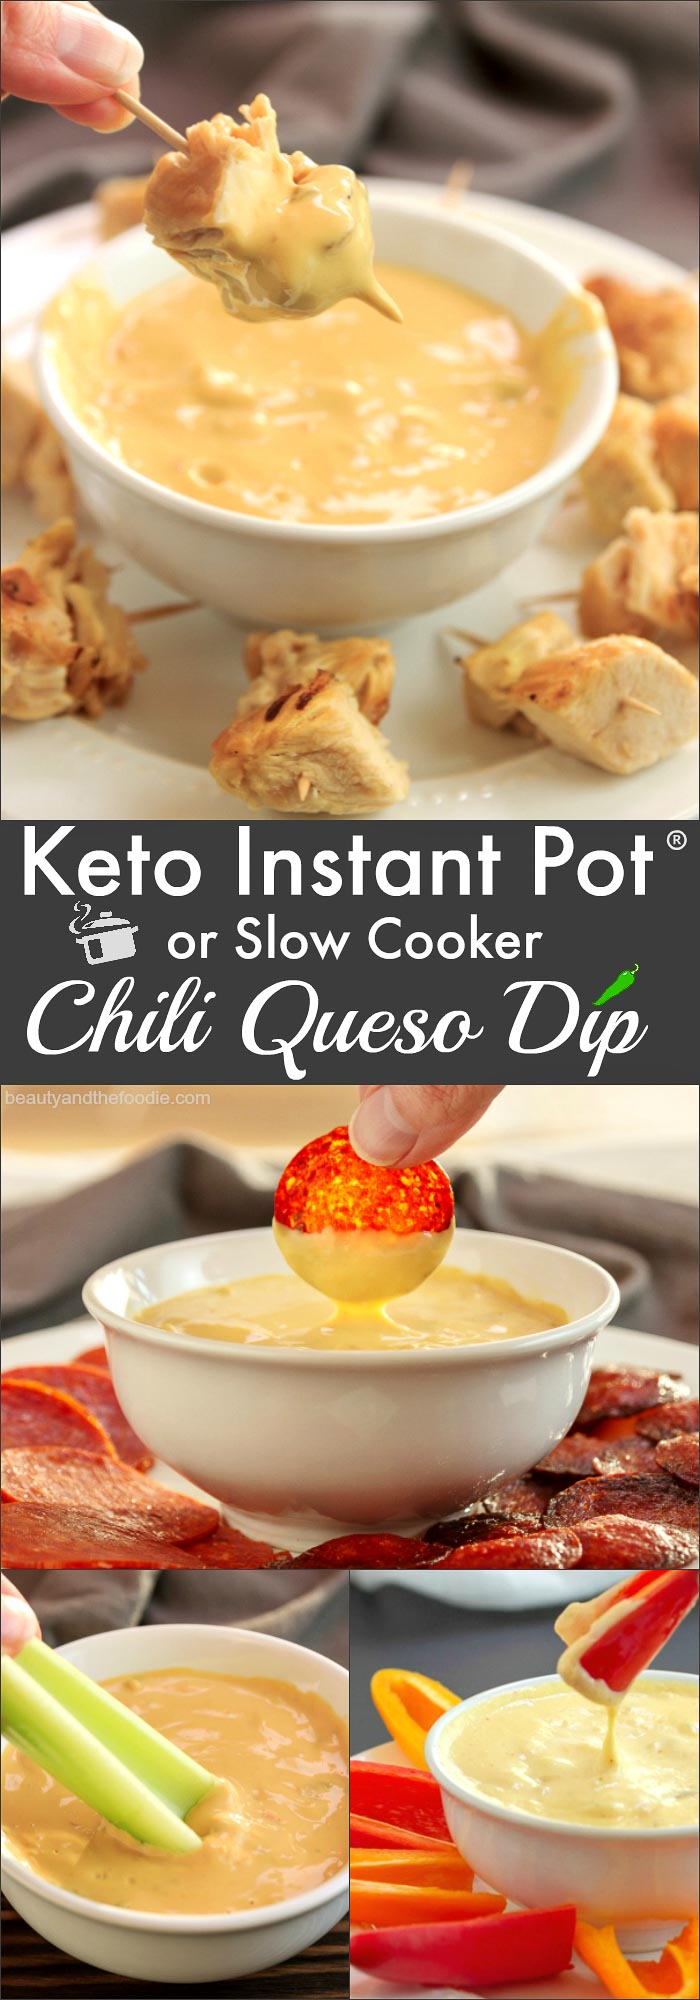 Keto Instant Pot or Slow Cooker Chili Queso Dip